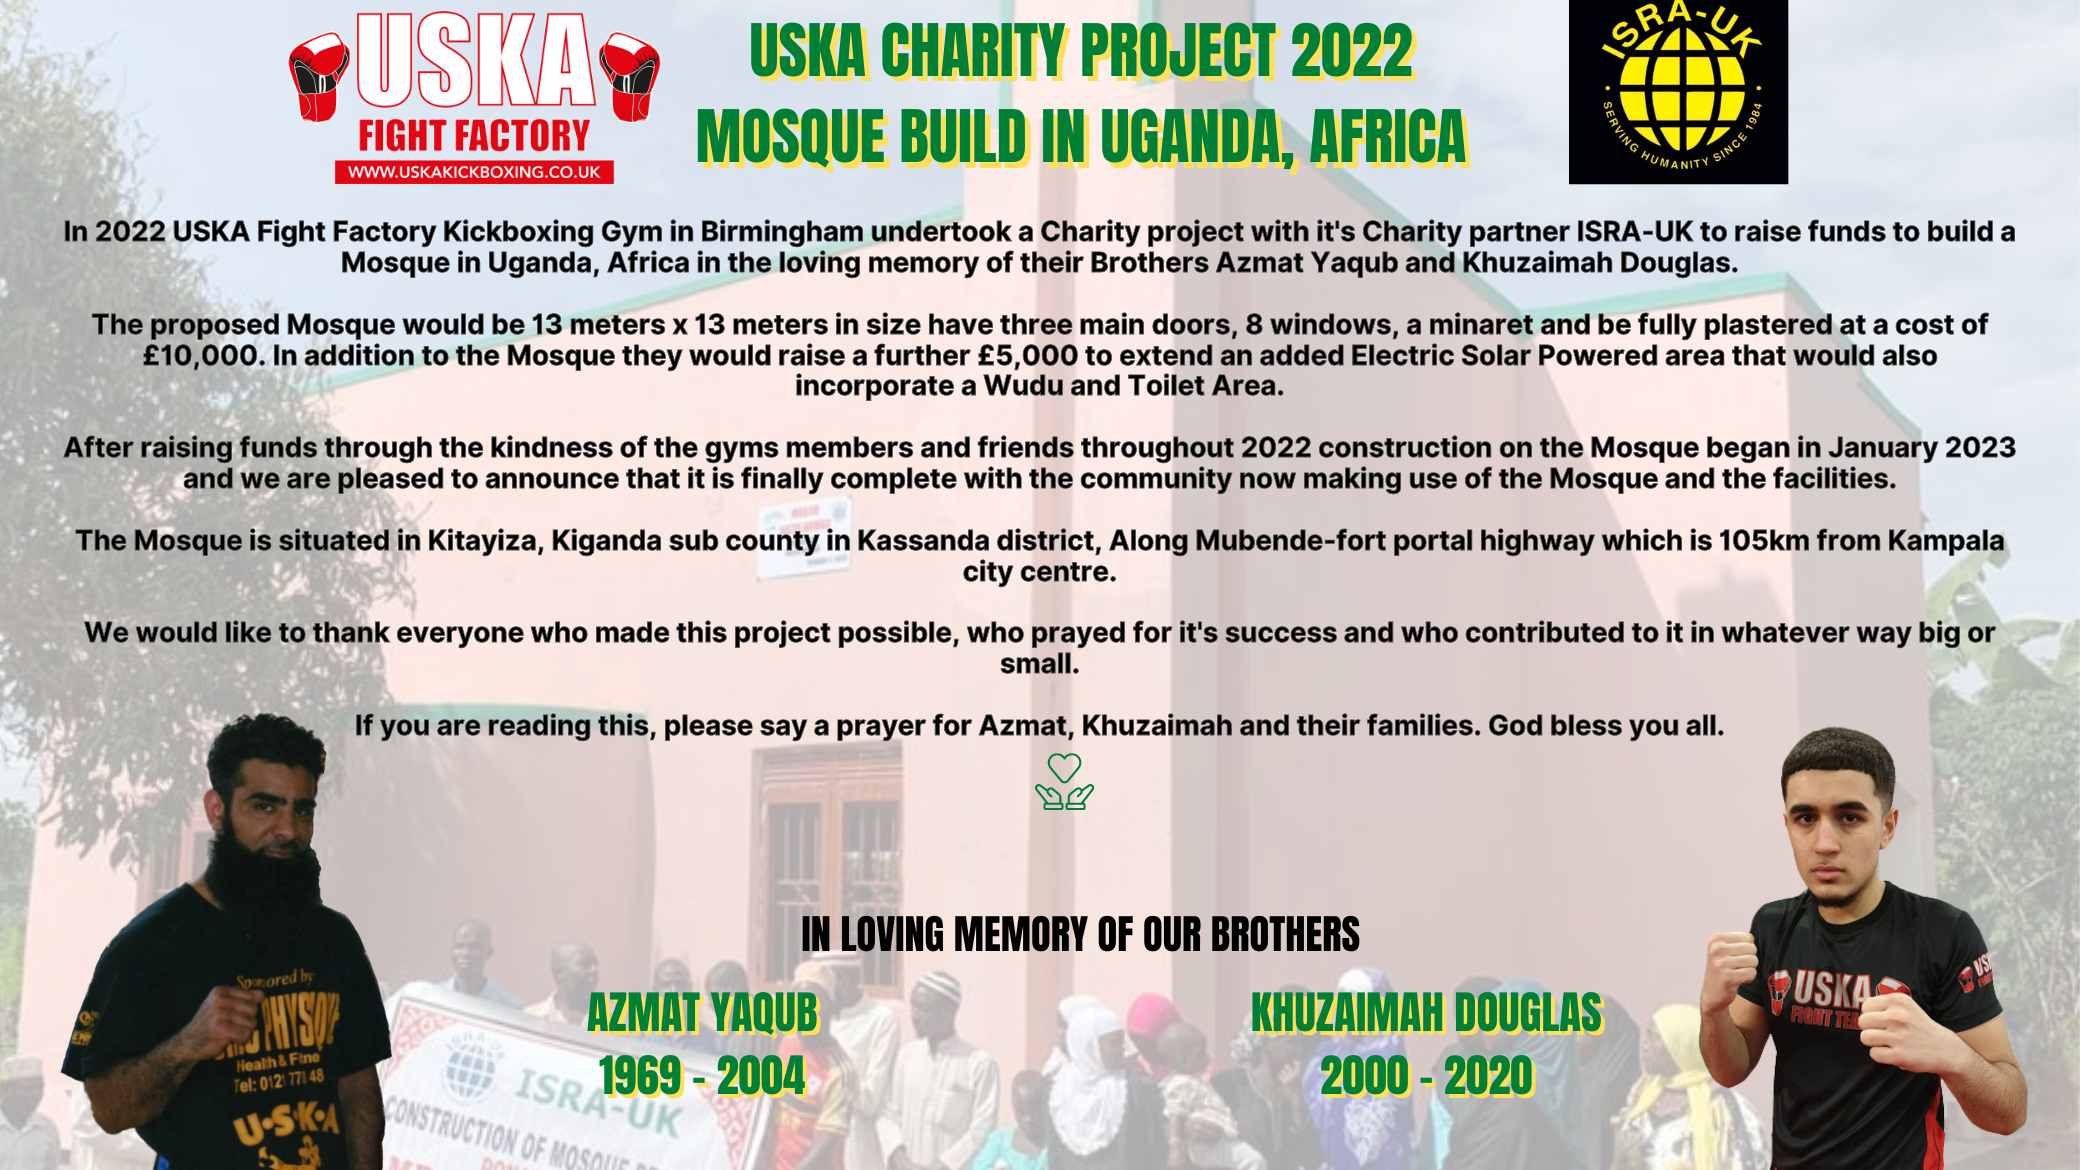 24-07-23 - Ugandan Mosque Build and USKA Charity Project 2022 now complete